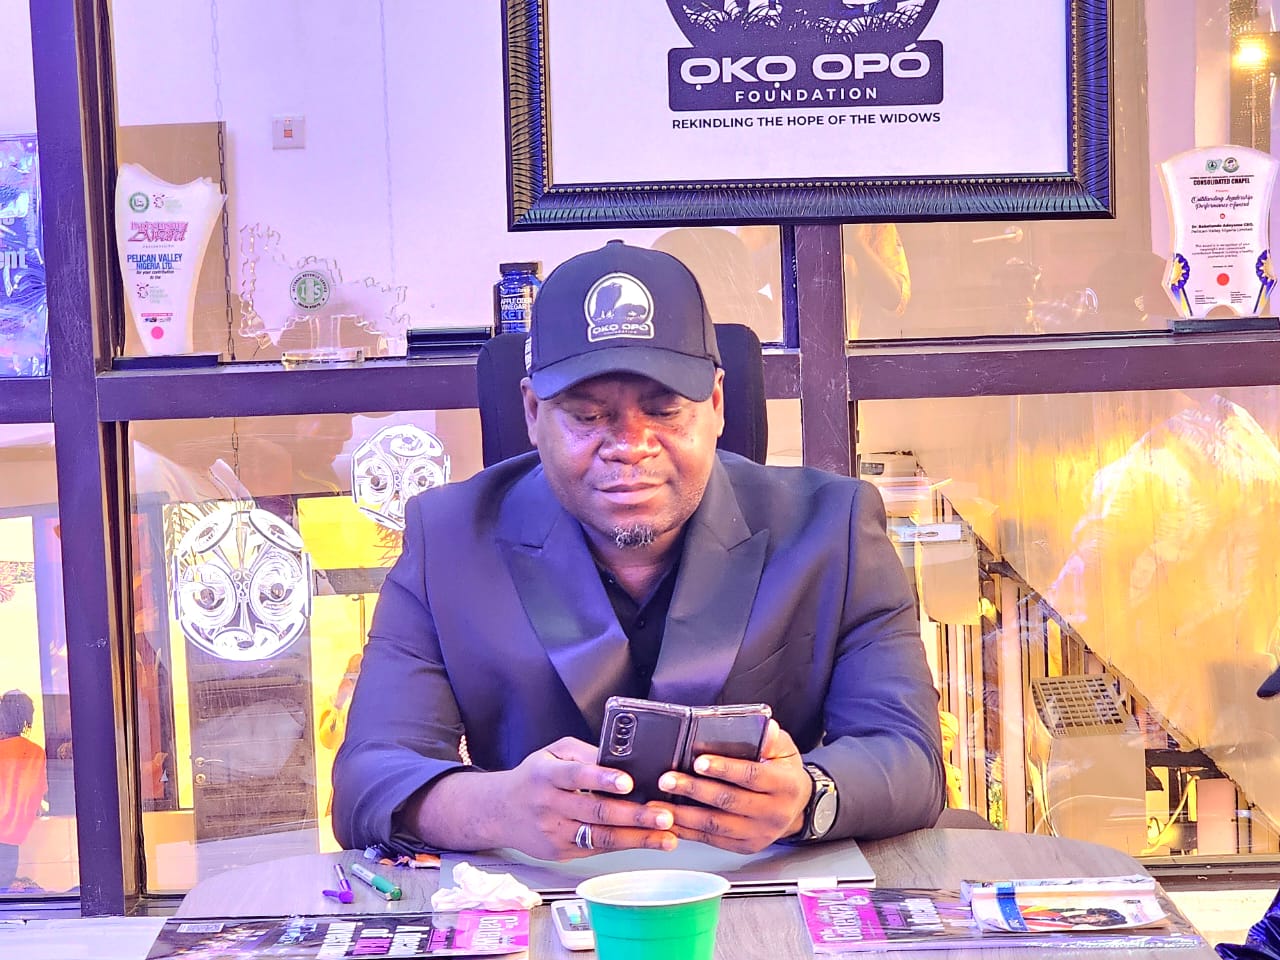 Day Oko Opo Foundation was launched!